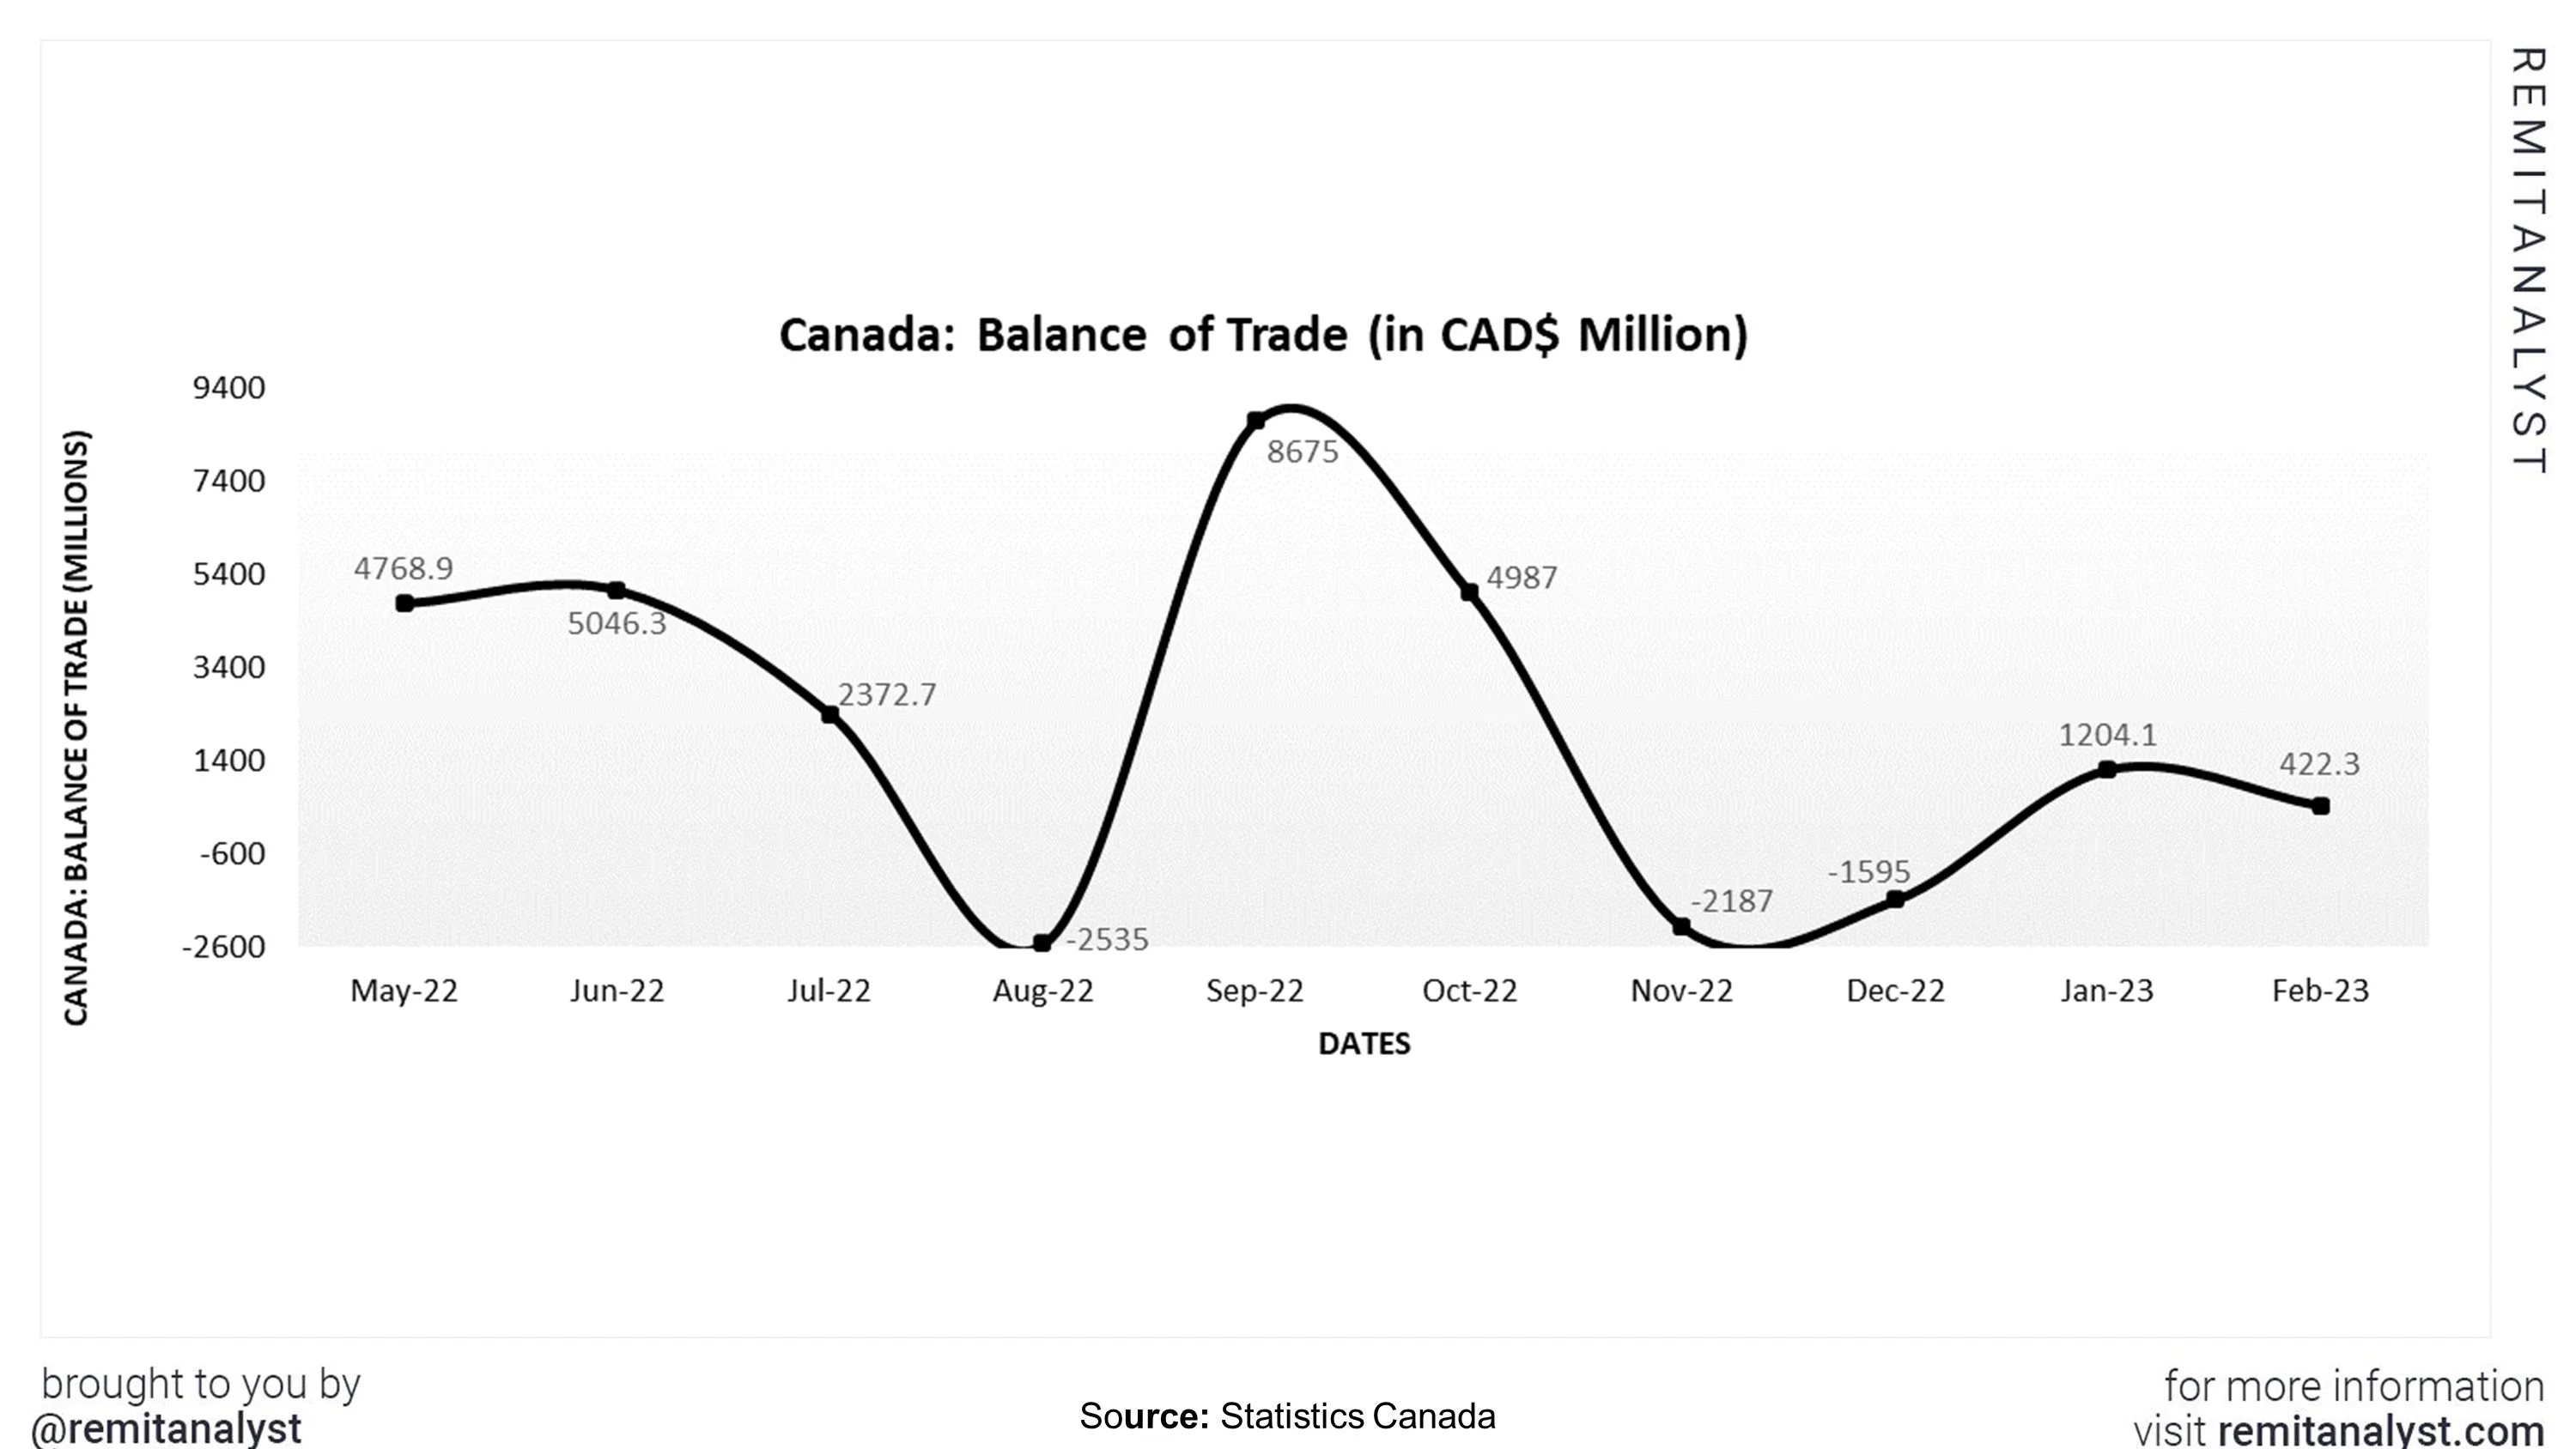 balance-of-trade-canada-from-may-2022-to-feb-2023